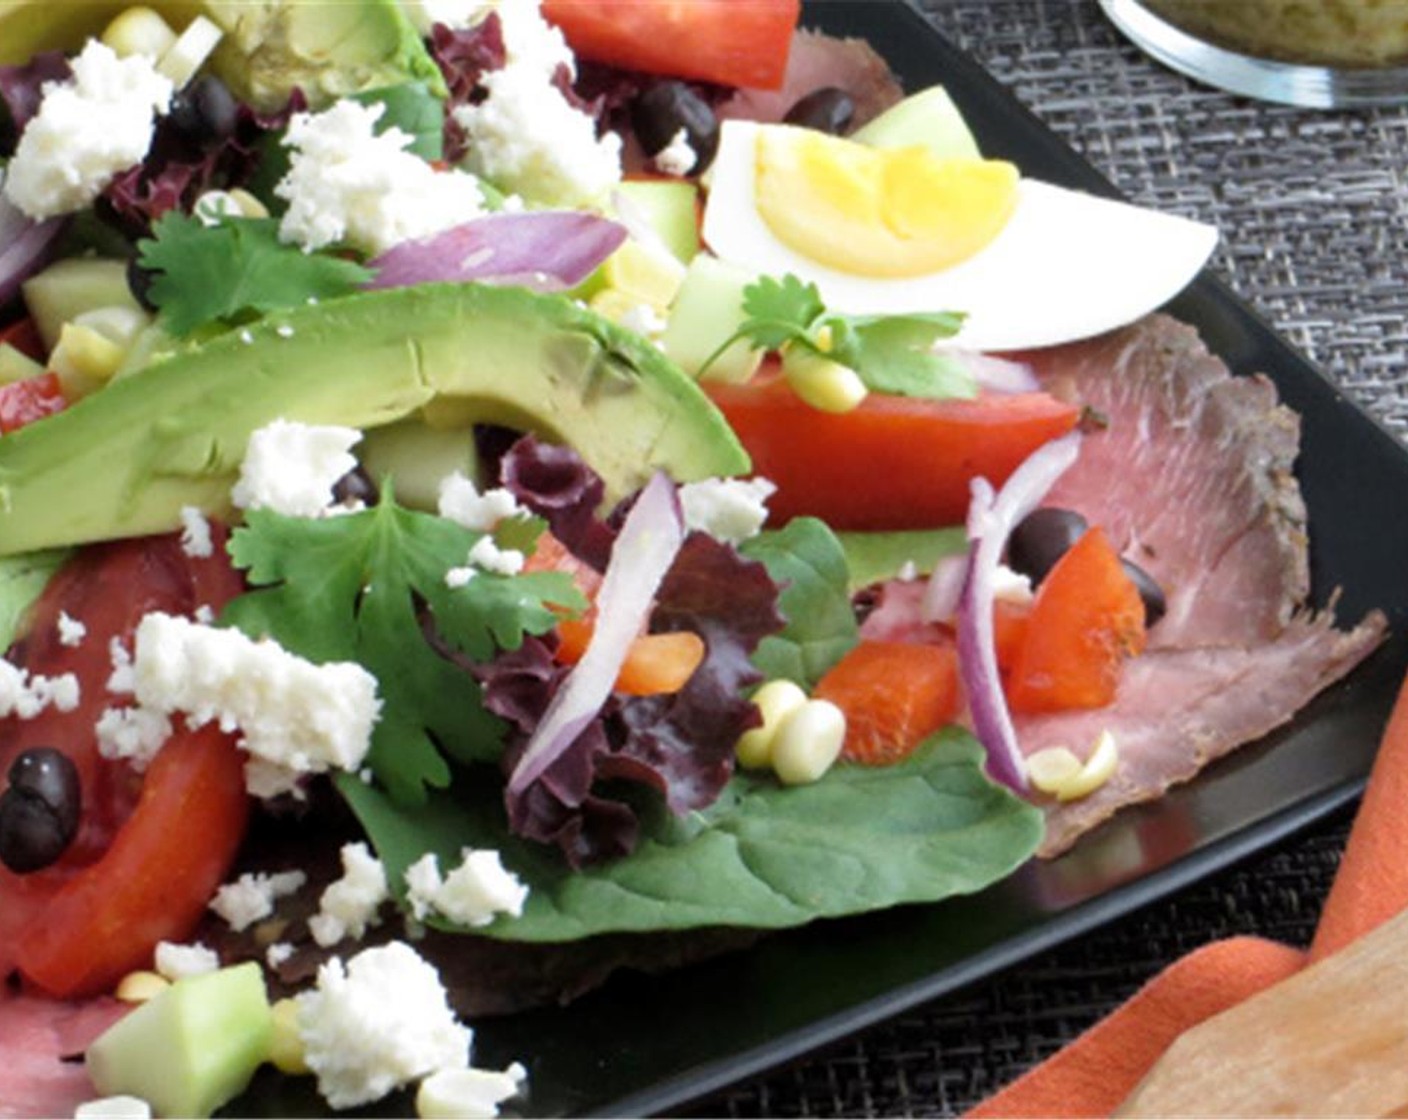 step 3 Spoon several tablespoons of lime vinaigrette over the salad. Toss with salad tongs until mixture is lightly coated. Stack dressed salad atop the cooked steak. Arrange Eggs (2), Avocado (1) on top. Sprinkle with Fresh Cilantro (1/2 cup)